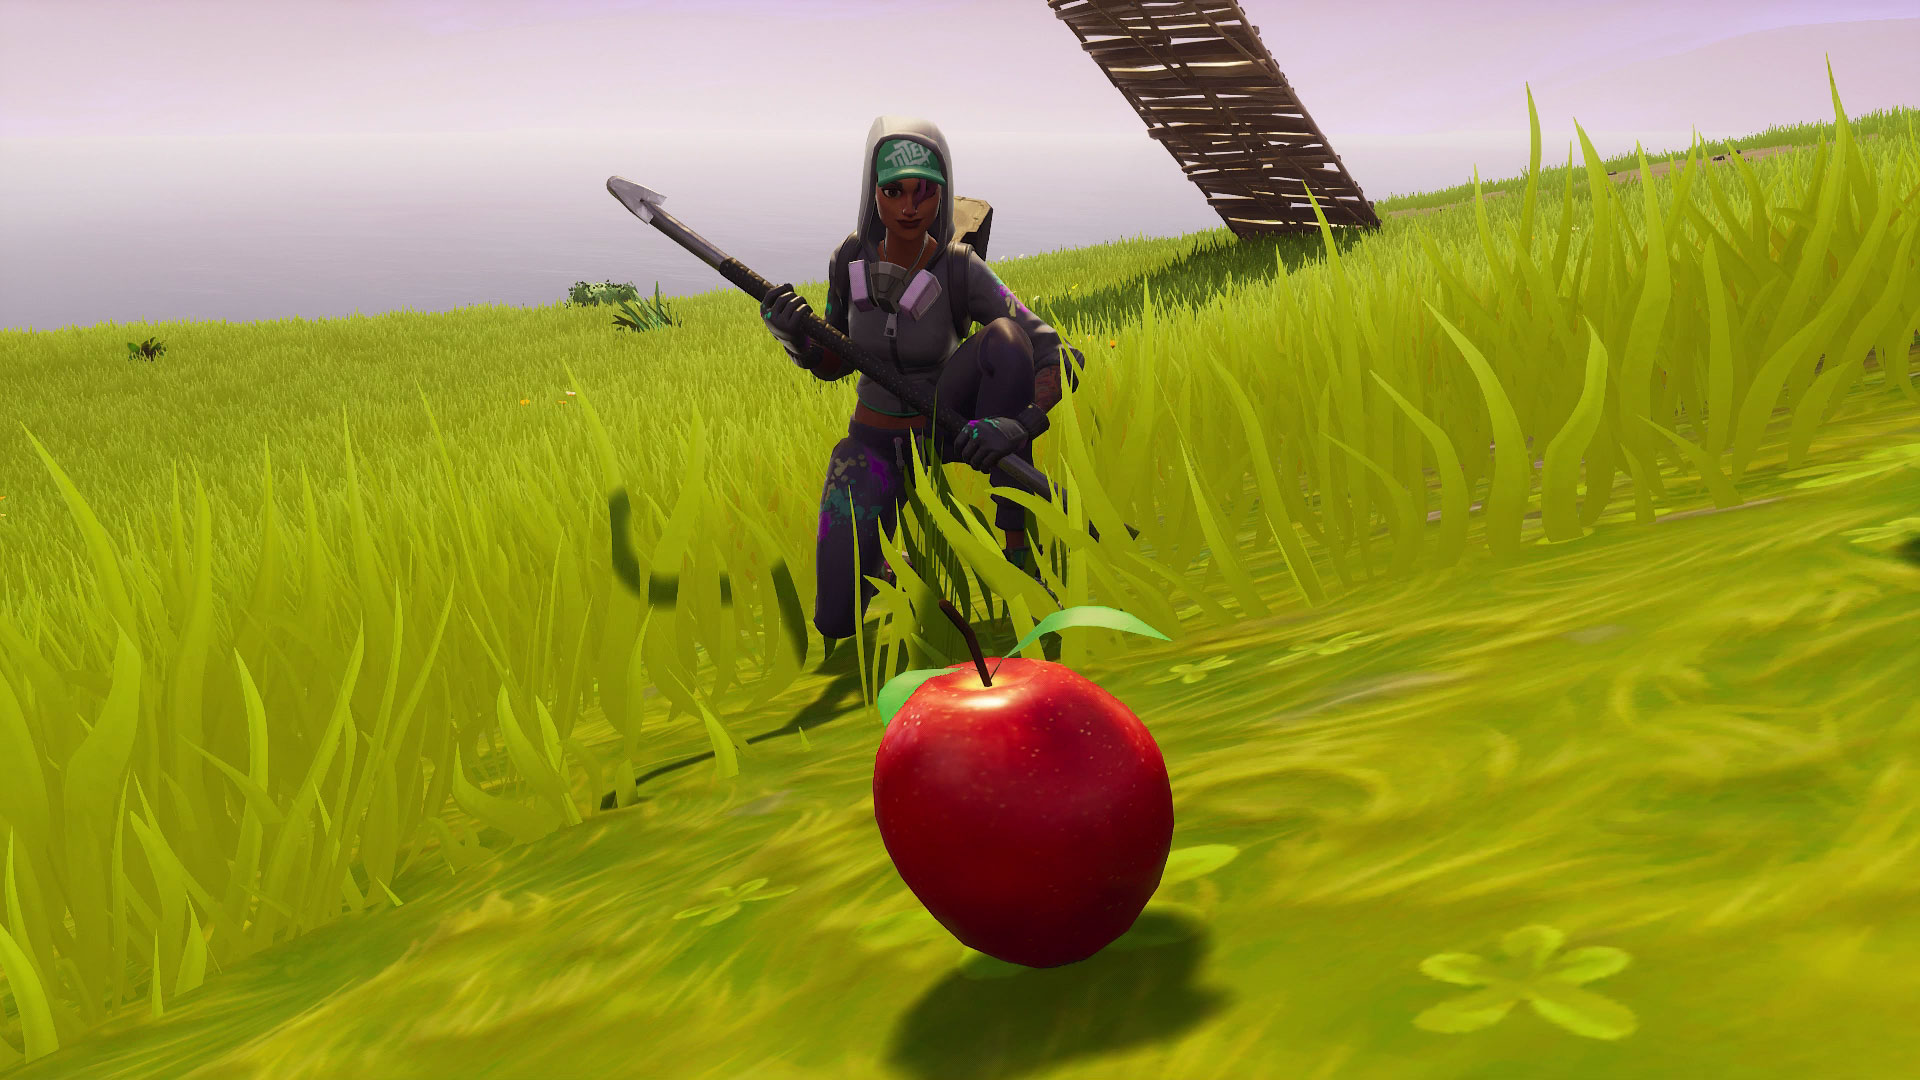 Fortnite Apple Locations Where To Find Fortnite Apples And How To - fortnite a!   pple locations where to find fortnite apples and how to gain health fro!   m them gamesradar